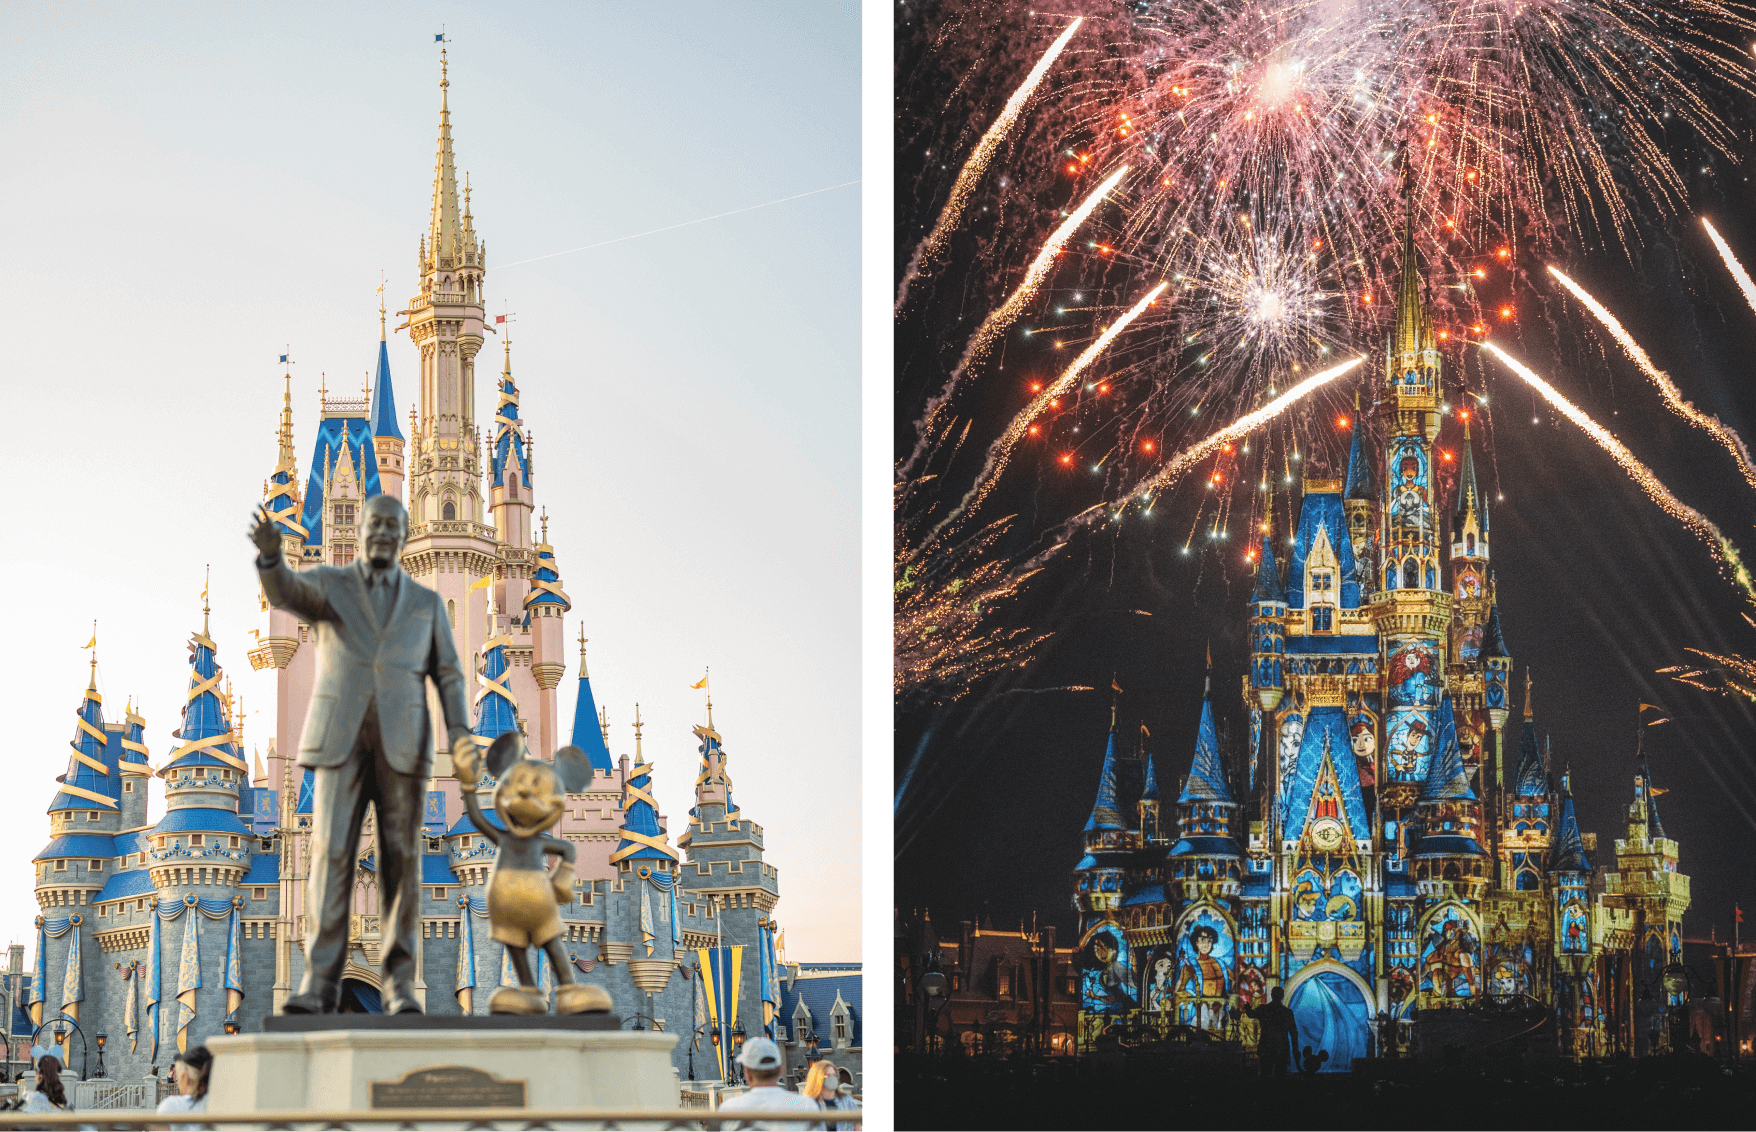 2 images showing Cinderella’s Castle in Walt Disney World in Florida, U.S.A. in the daytime and at night. The first image shows the extravagant gold, white, and blue castle in the background with a statue of Walt Disney holding Micke Mouse’s hand in the foreground. The second image shows the castle at night, surrounded by red and gold fireworks. The castle is decorated by a light display showing animations of different iconic Disney characters like Pocahontas, Aladdin, Snow White, Cinderella, Woody, Elsa, Anna, Aurora, and more. 